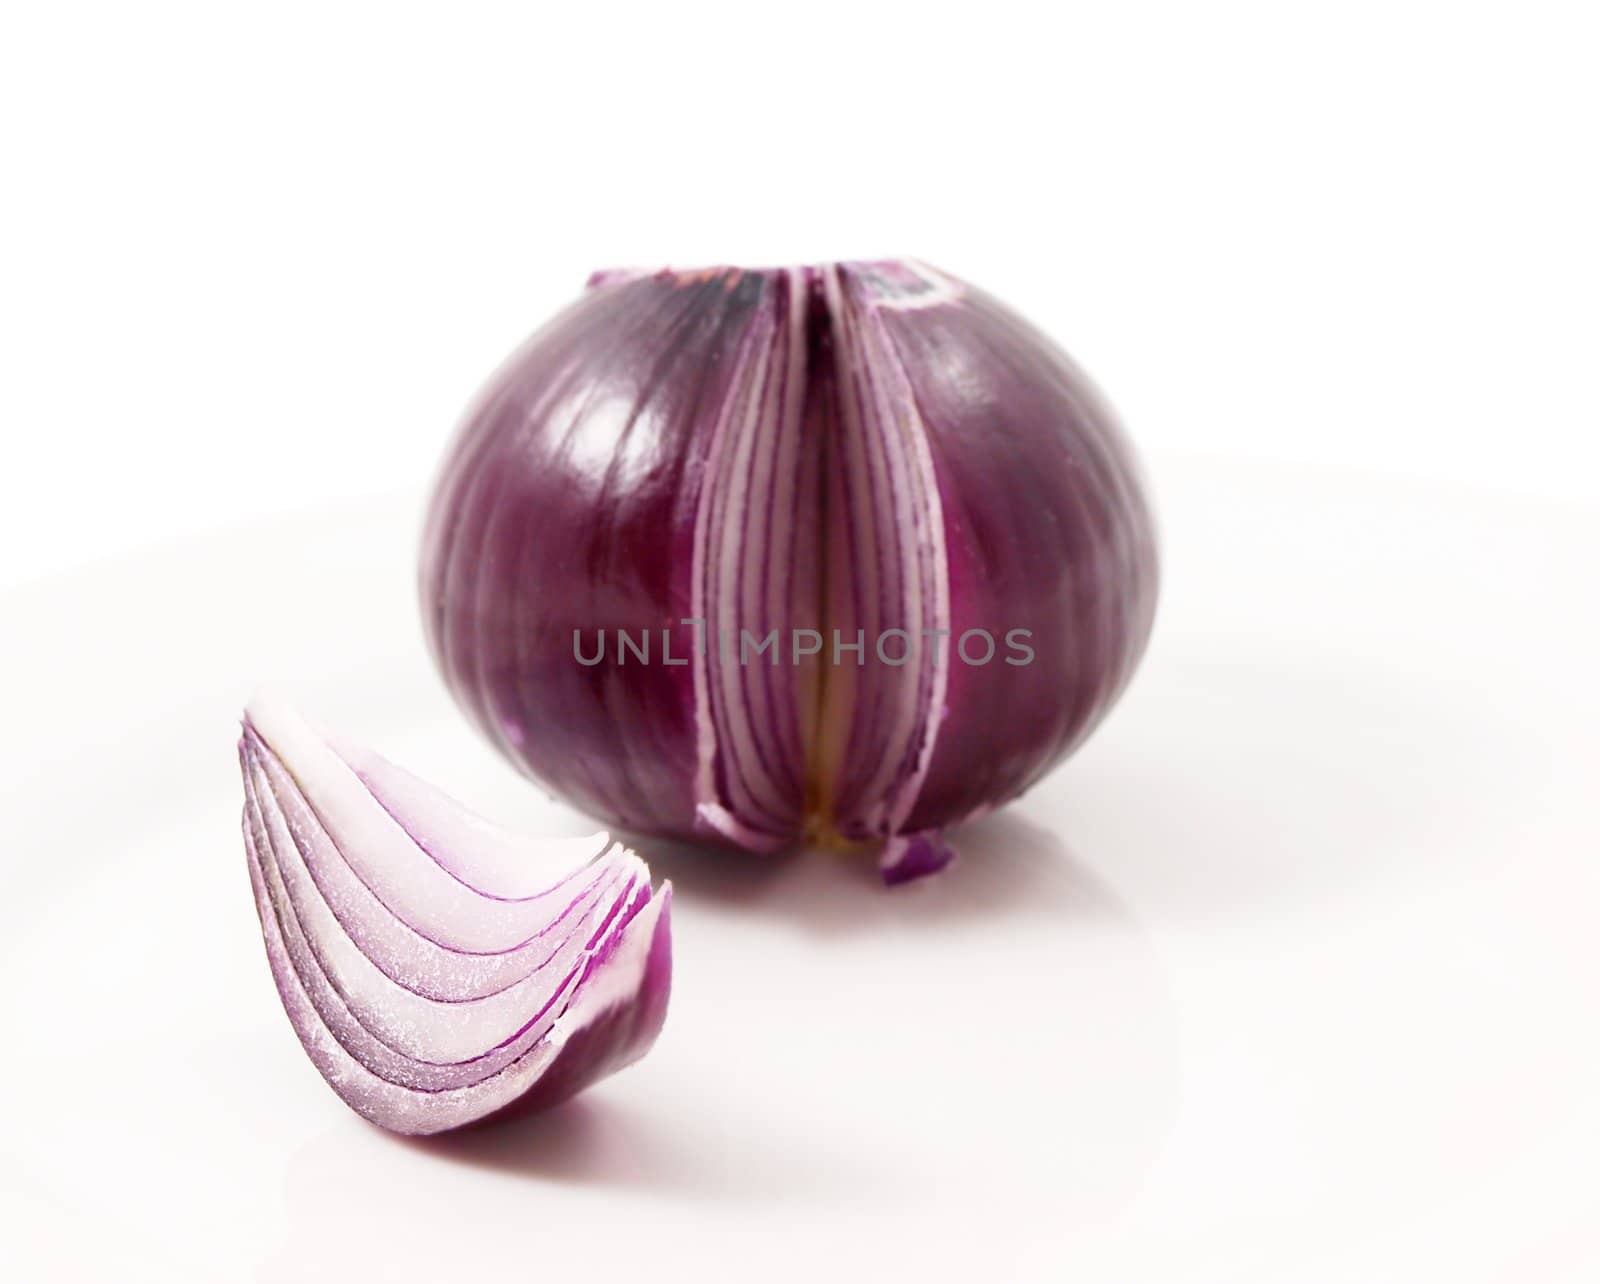 Red onion, whole, one slice up front in focus, towards white background